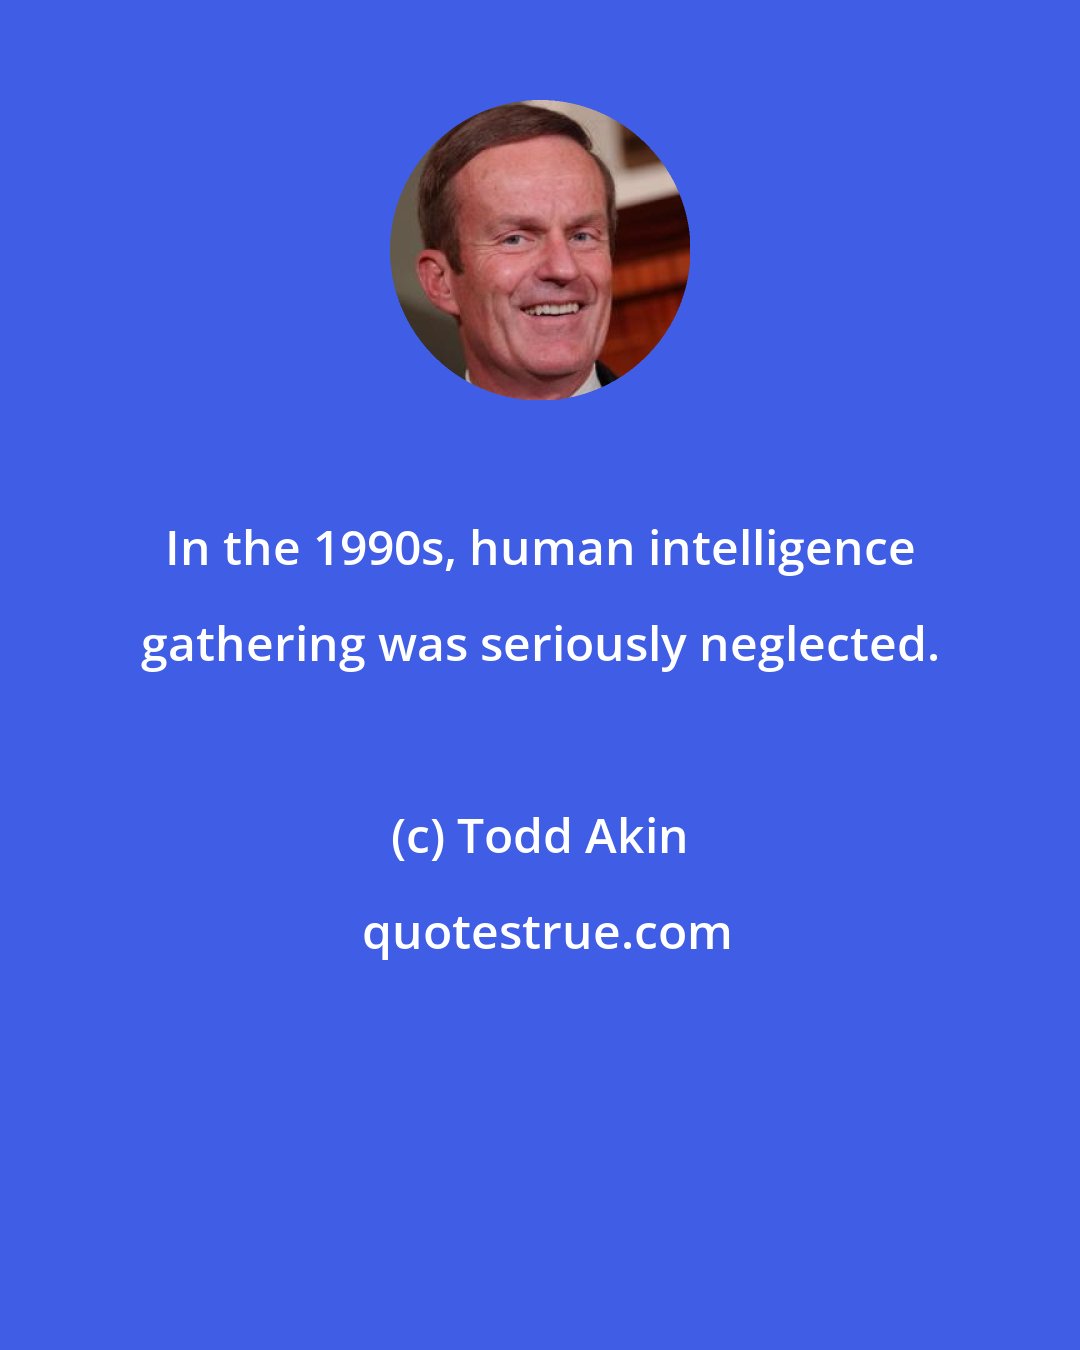 Todd Akin: In the 1990s, human intelligence gathering was seriously neglected.